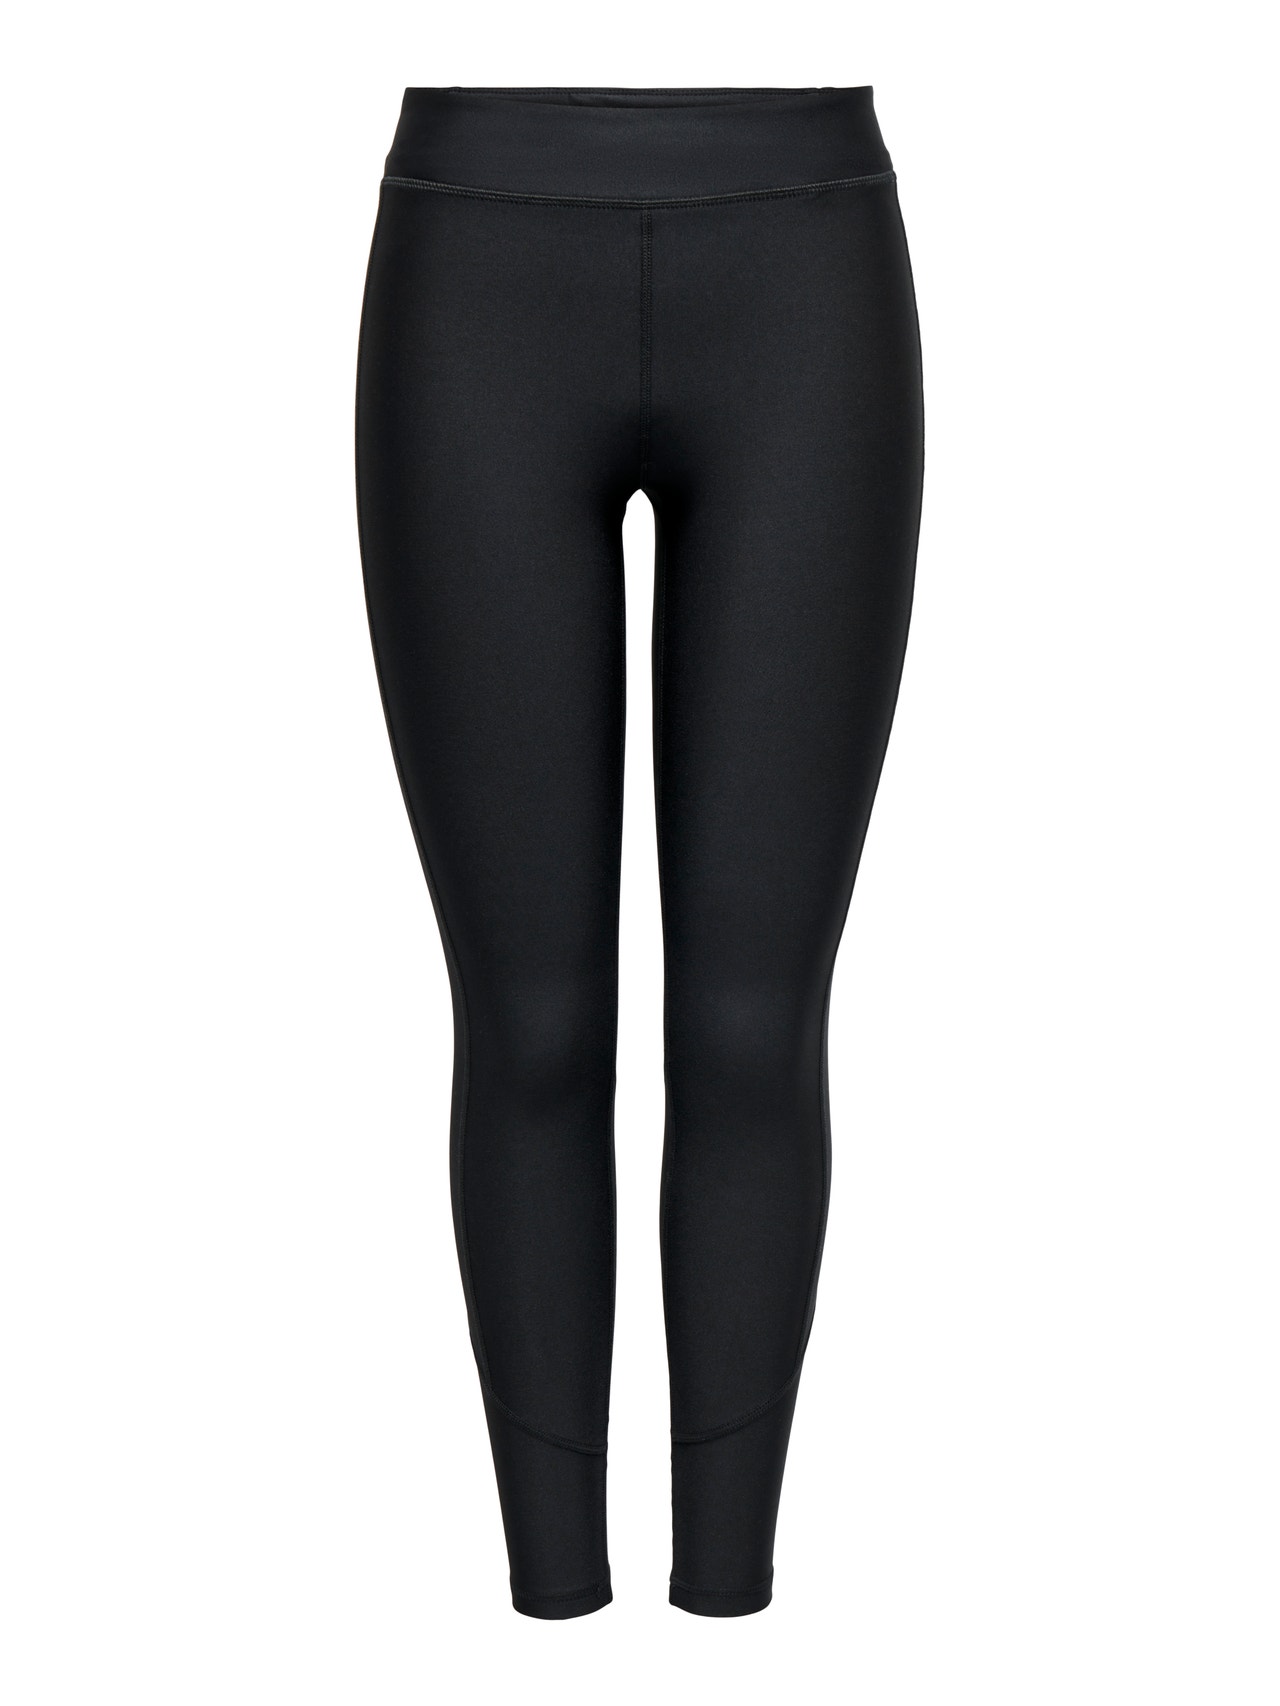 ONLY Tight Fit Mid waist Leggings -Black - 15295175